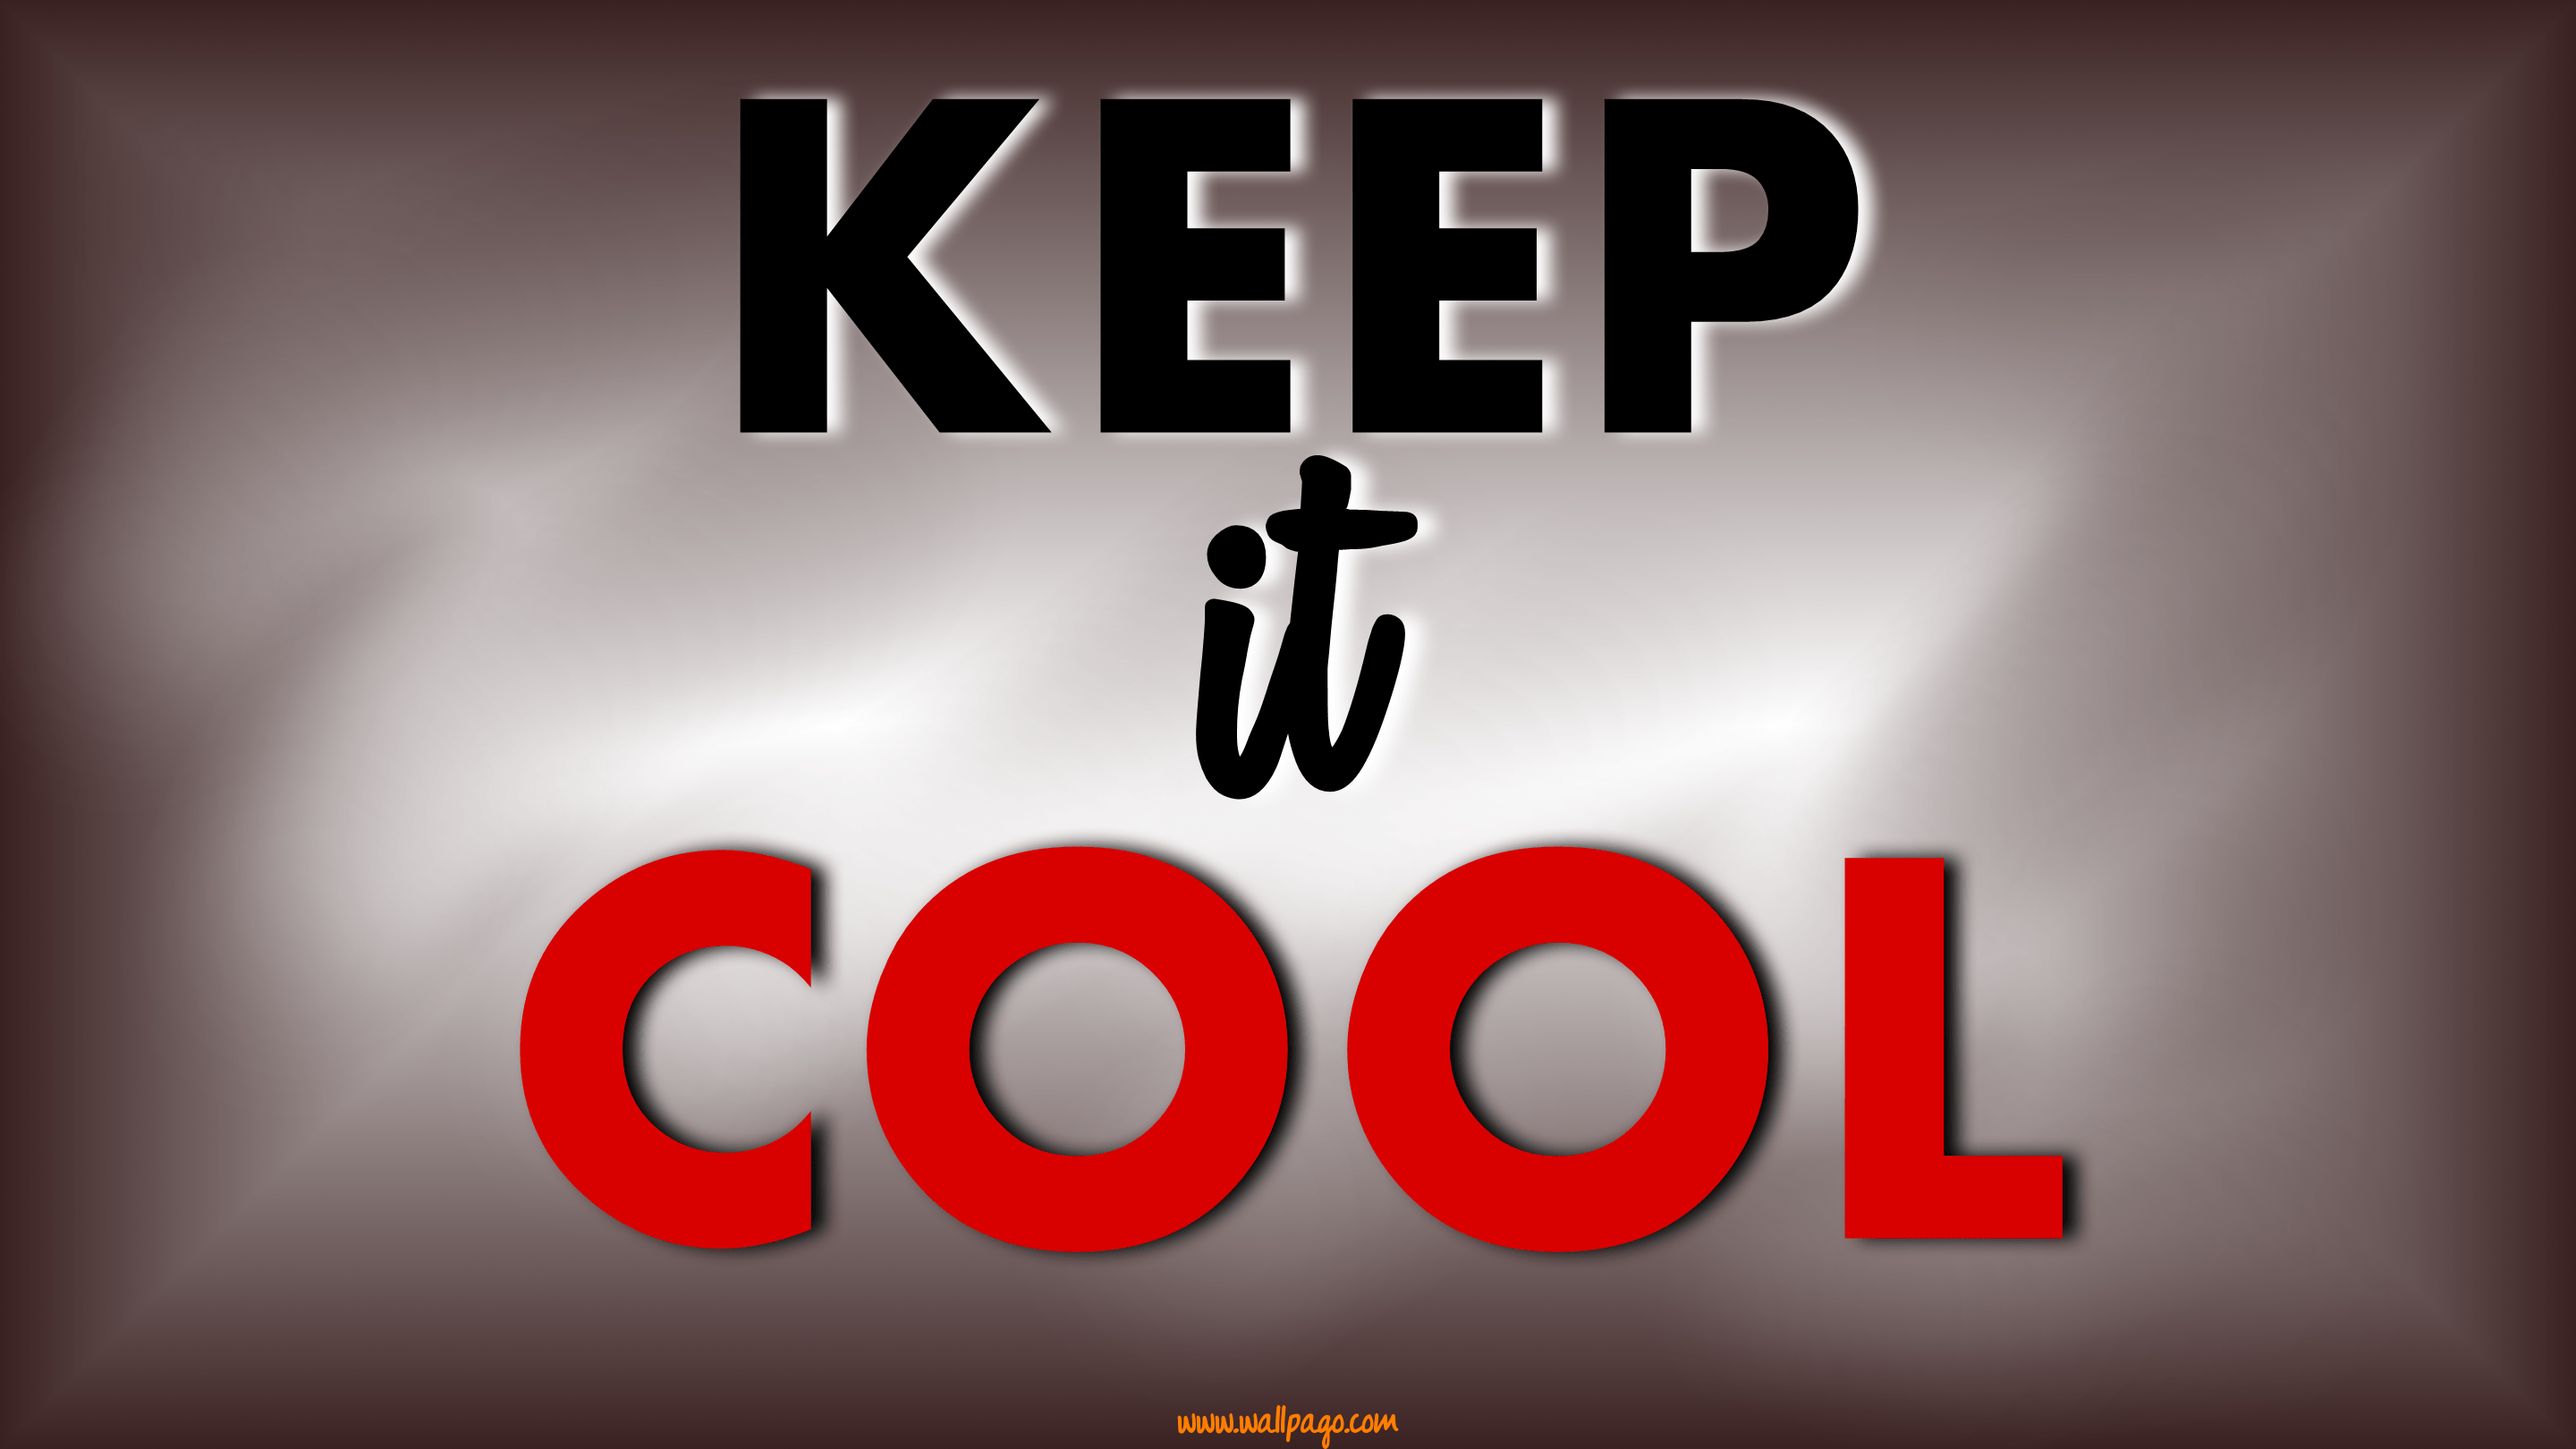 Keep it cool quote wallpaper. Keep it cool inspirational words